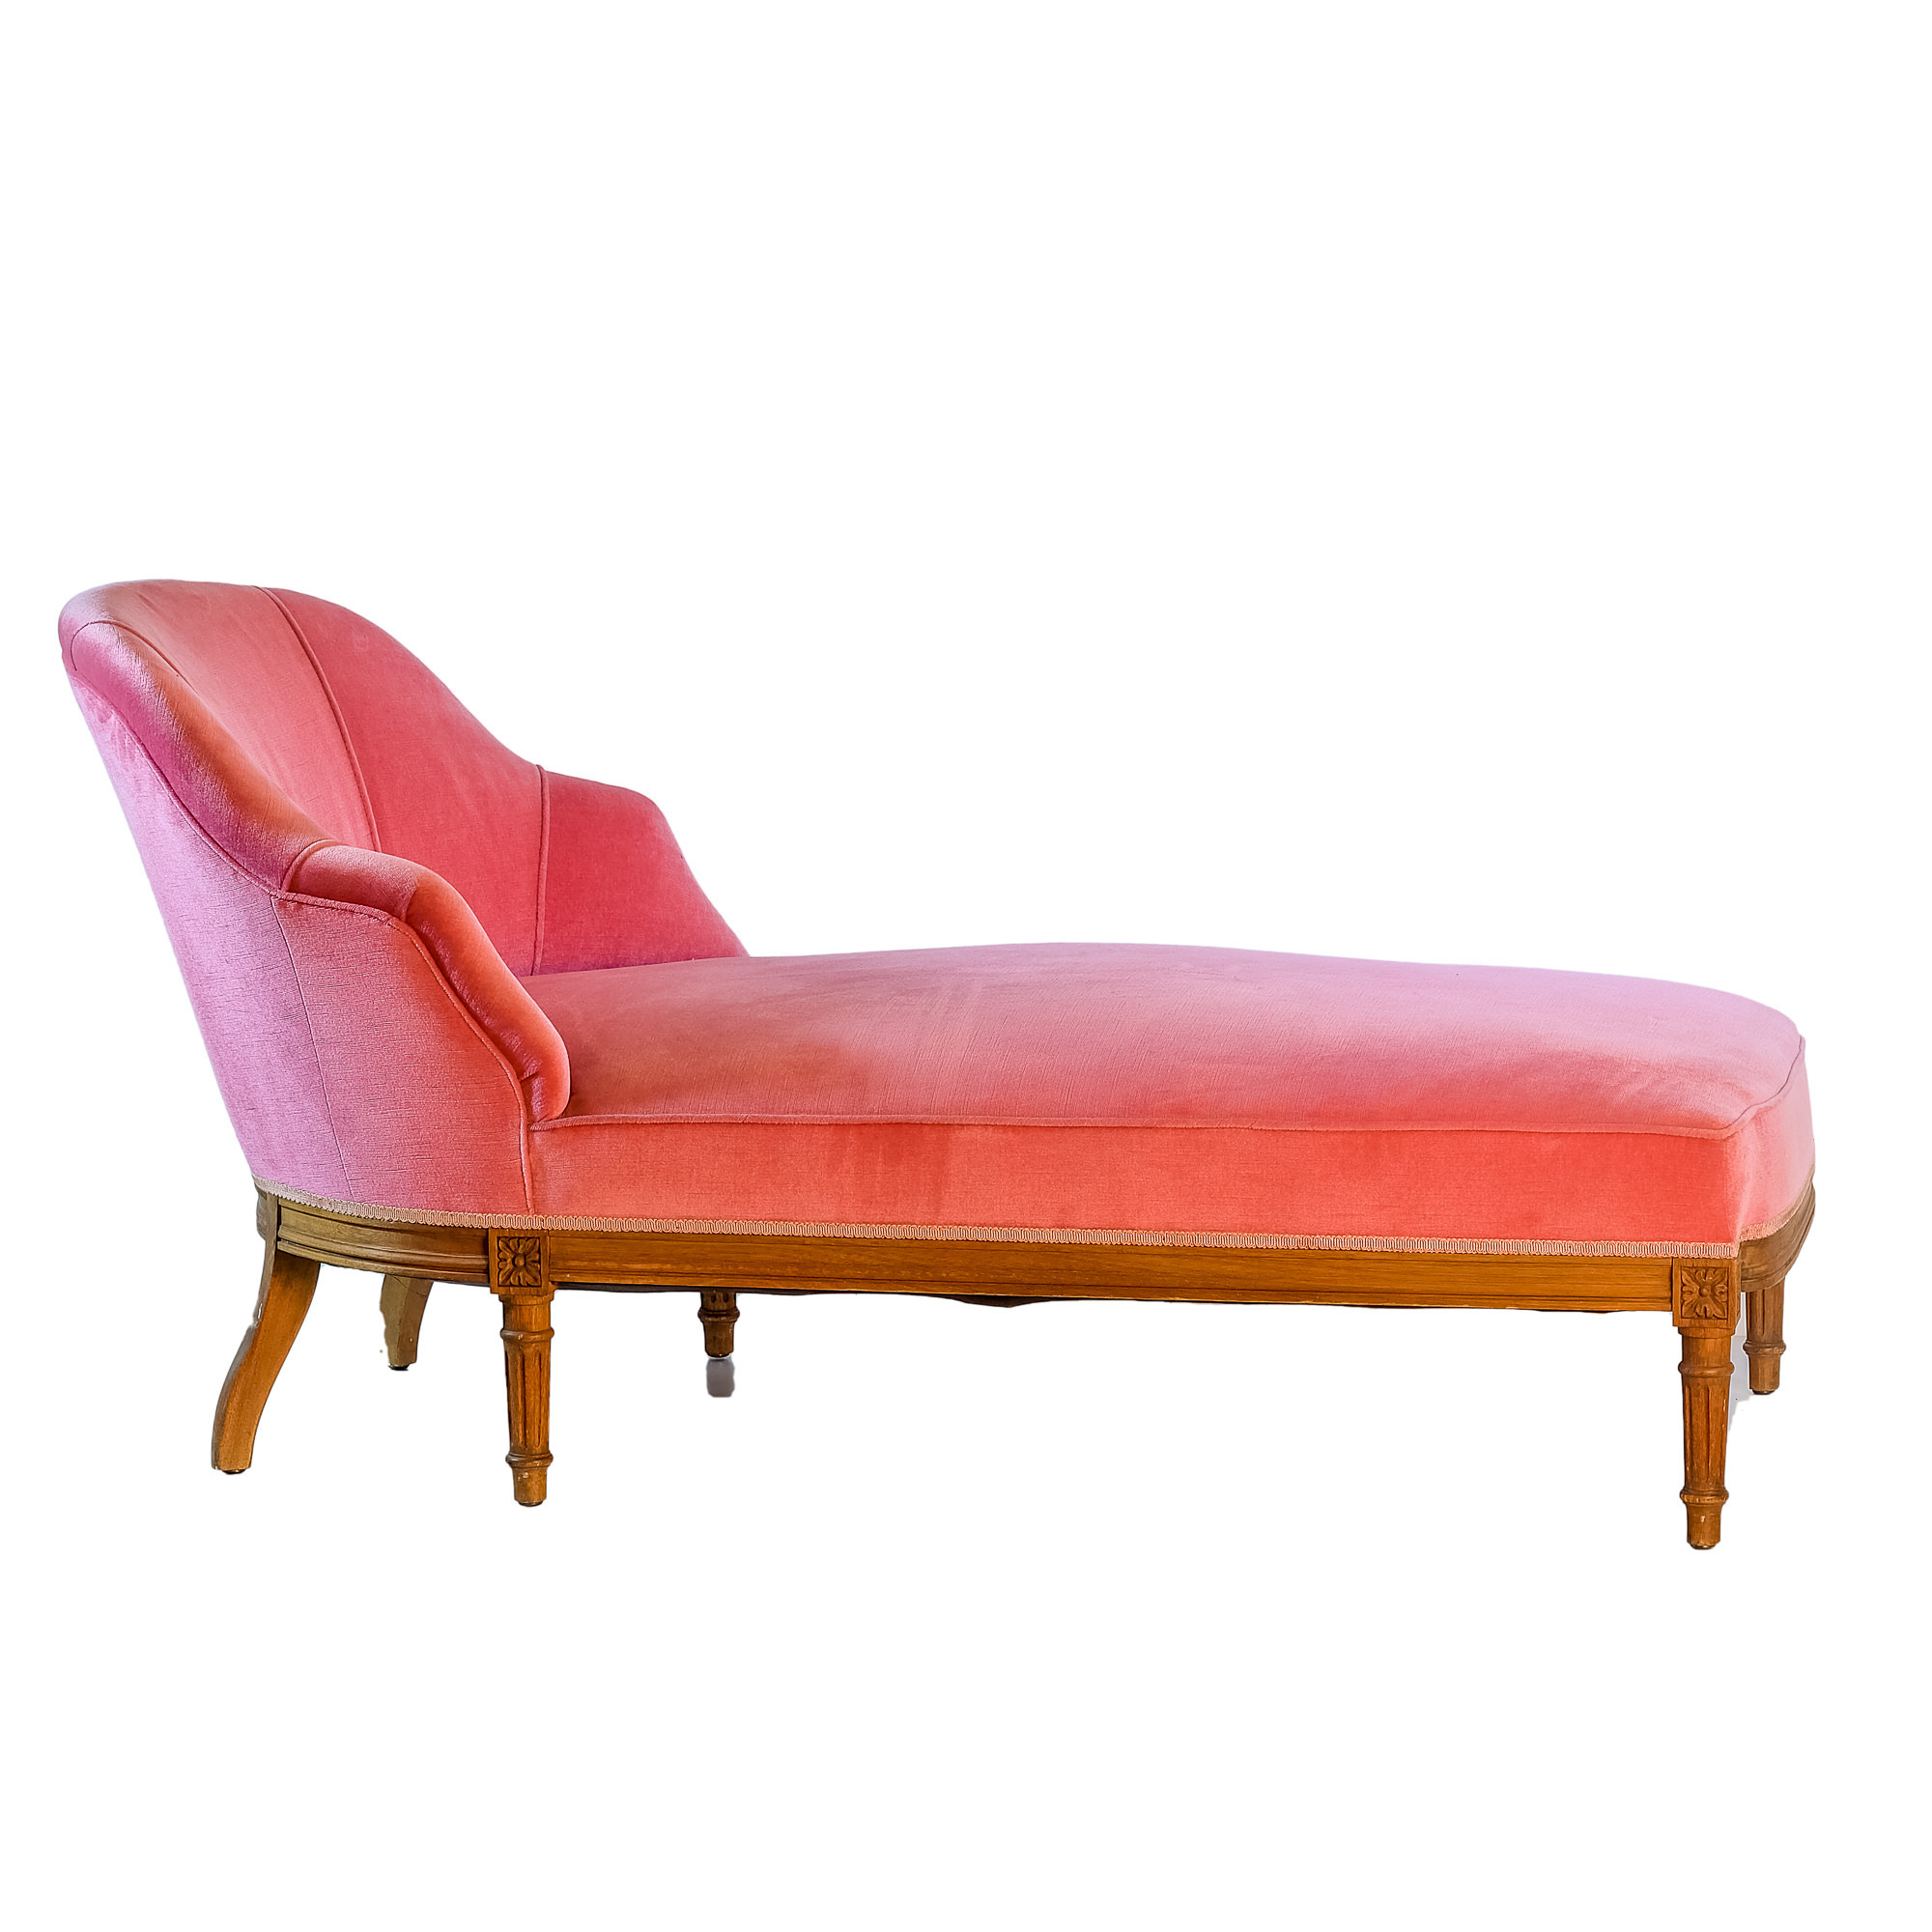 '20th Century Queensland Maple Day Bed with Pink Velvet Upholstery'